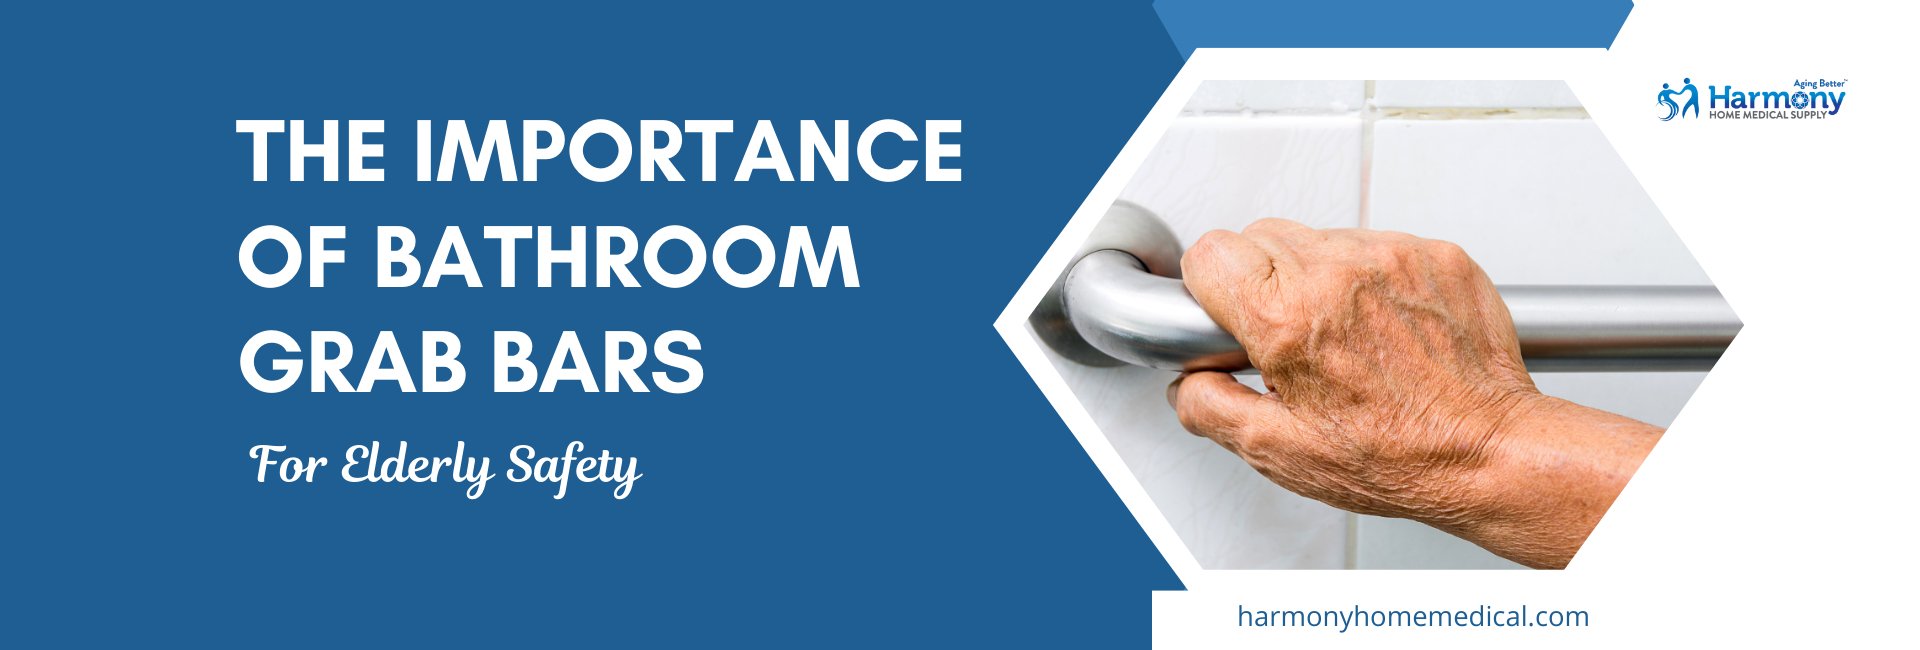 The Importance of Bathroom Grab Bars for Elderly Safety: A Comprehensive Guide